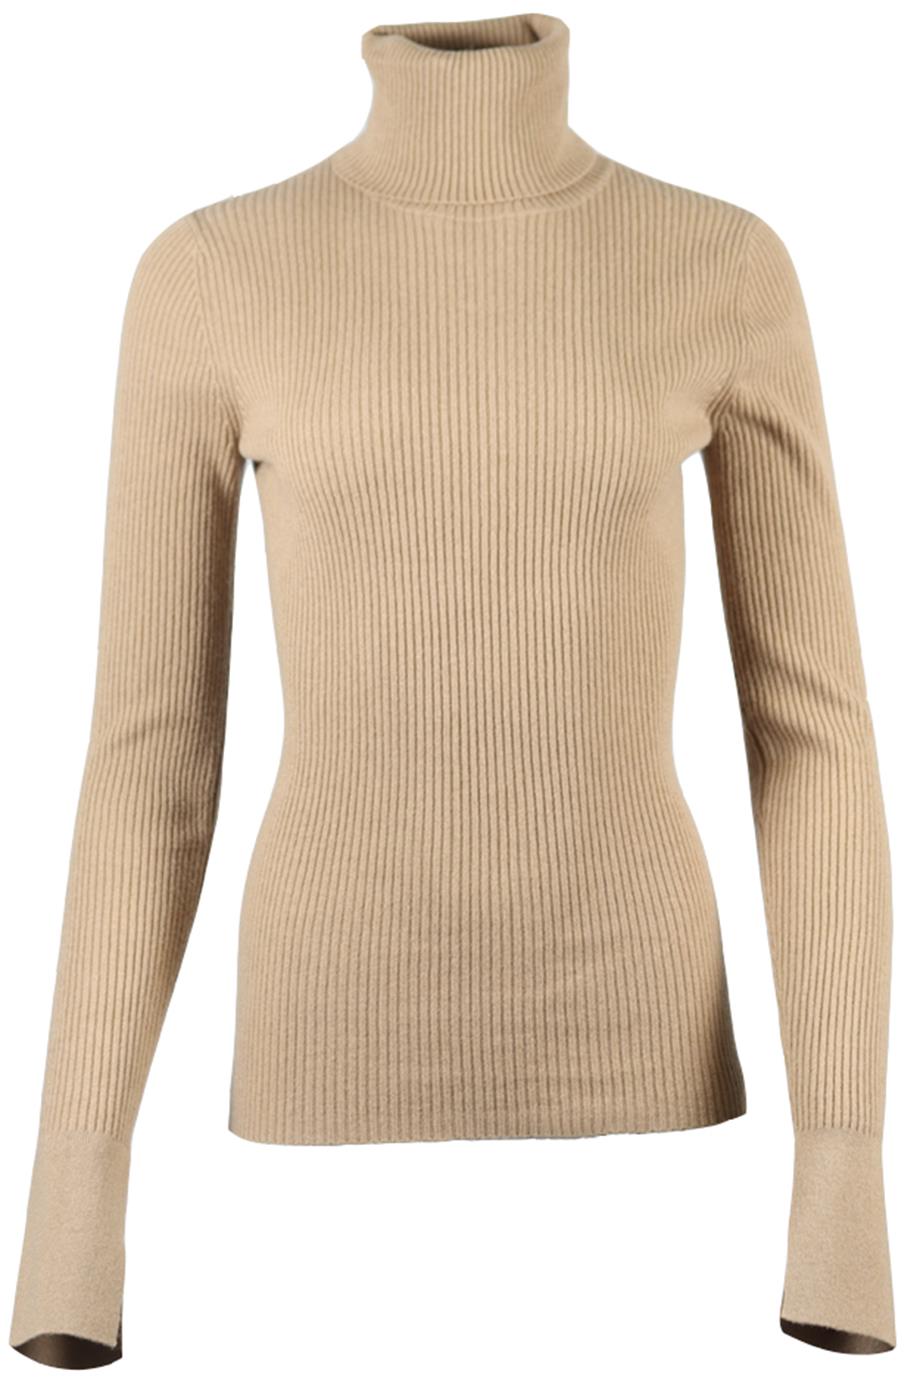 BARBARA BUI WOOL AND CASHMERE BLEND TUTRLENECK SWEATER LARGE